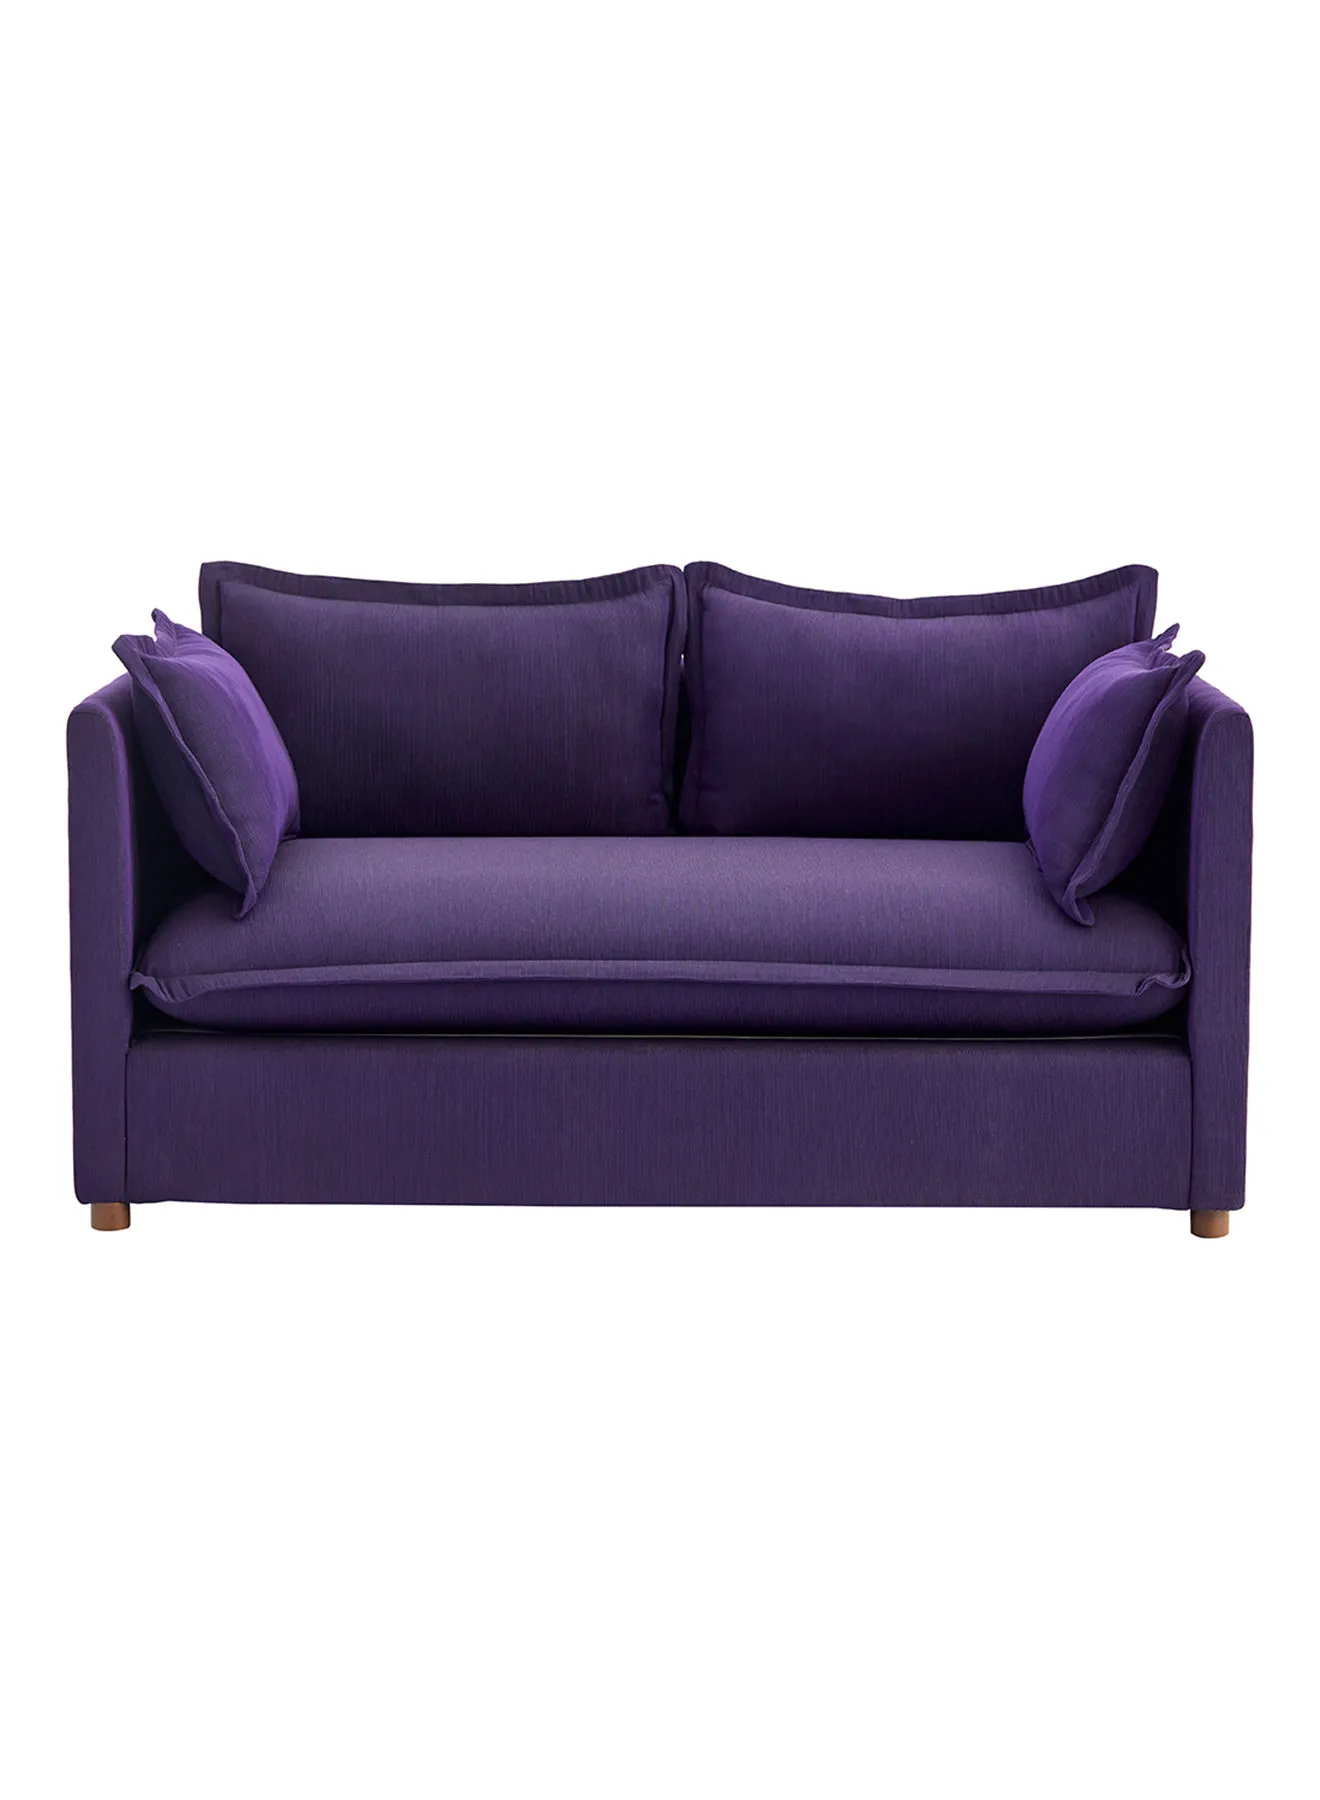 ebb & flow Sofa Luxurious - Purple Wood Couch - 1770 X 990 X 693 - 2 Seater Sofa Relaxing Sofa